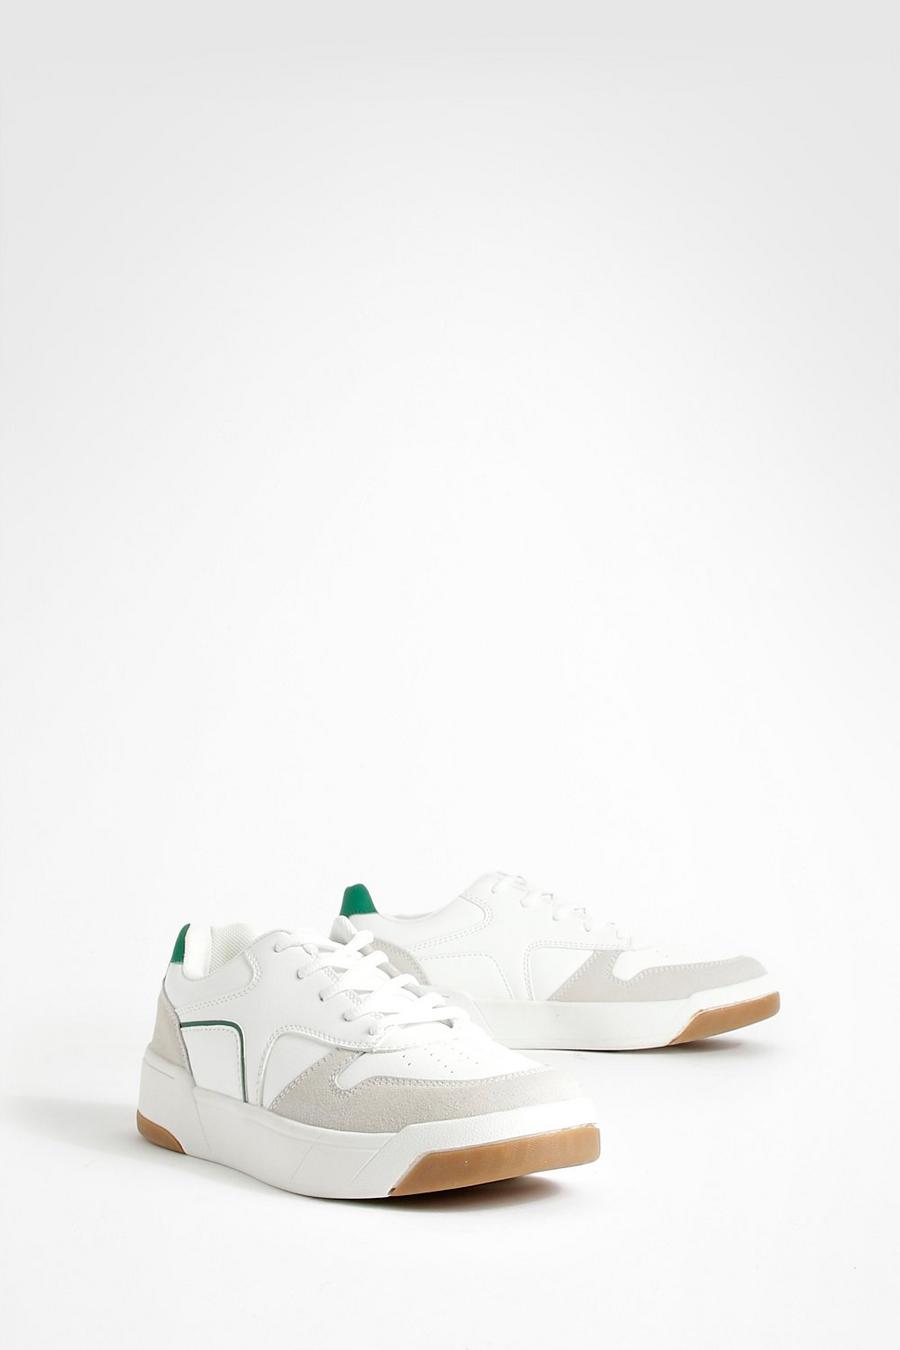 White Contrast Gum Sole Tennis Trainers